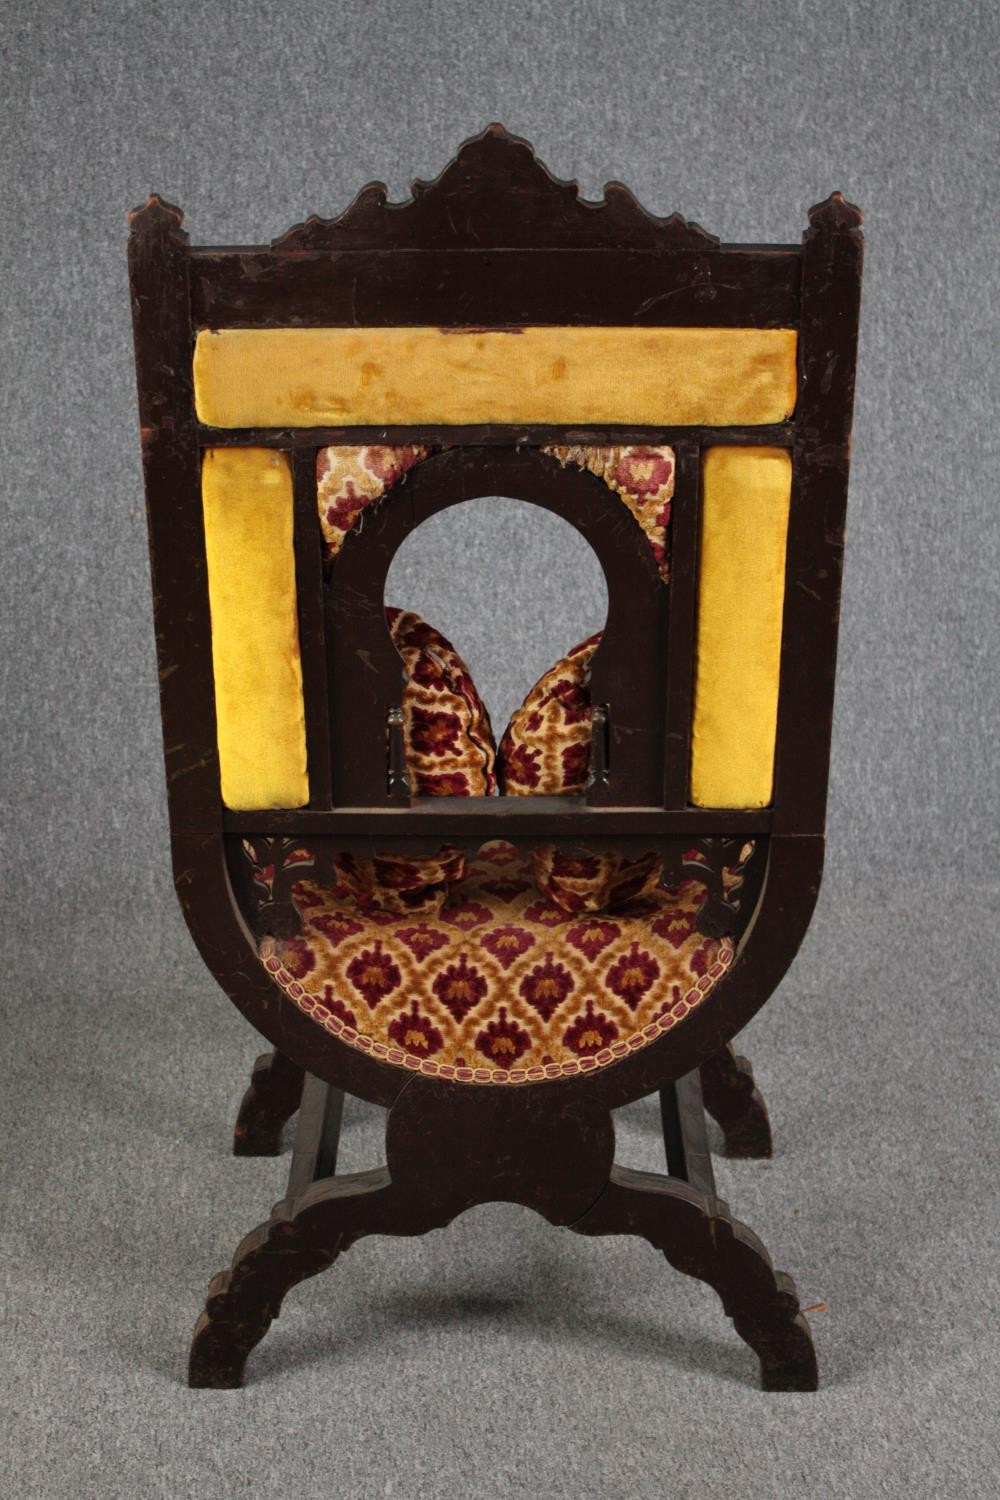 Throne chair, late 19th century polychrome of Eastern influence, signed or inscribed to the front. - Image 4 of 8